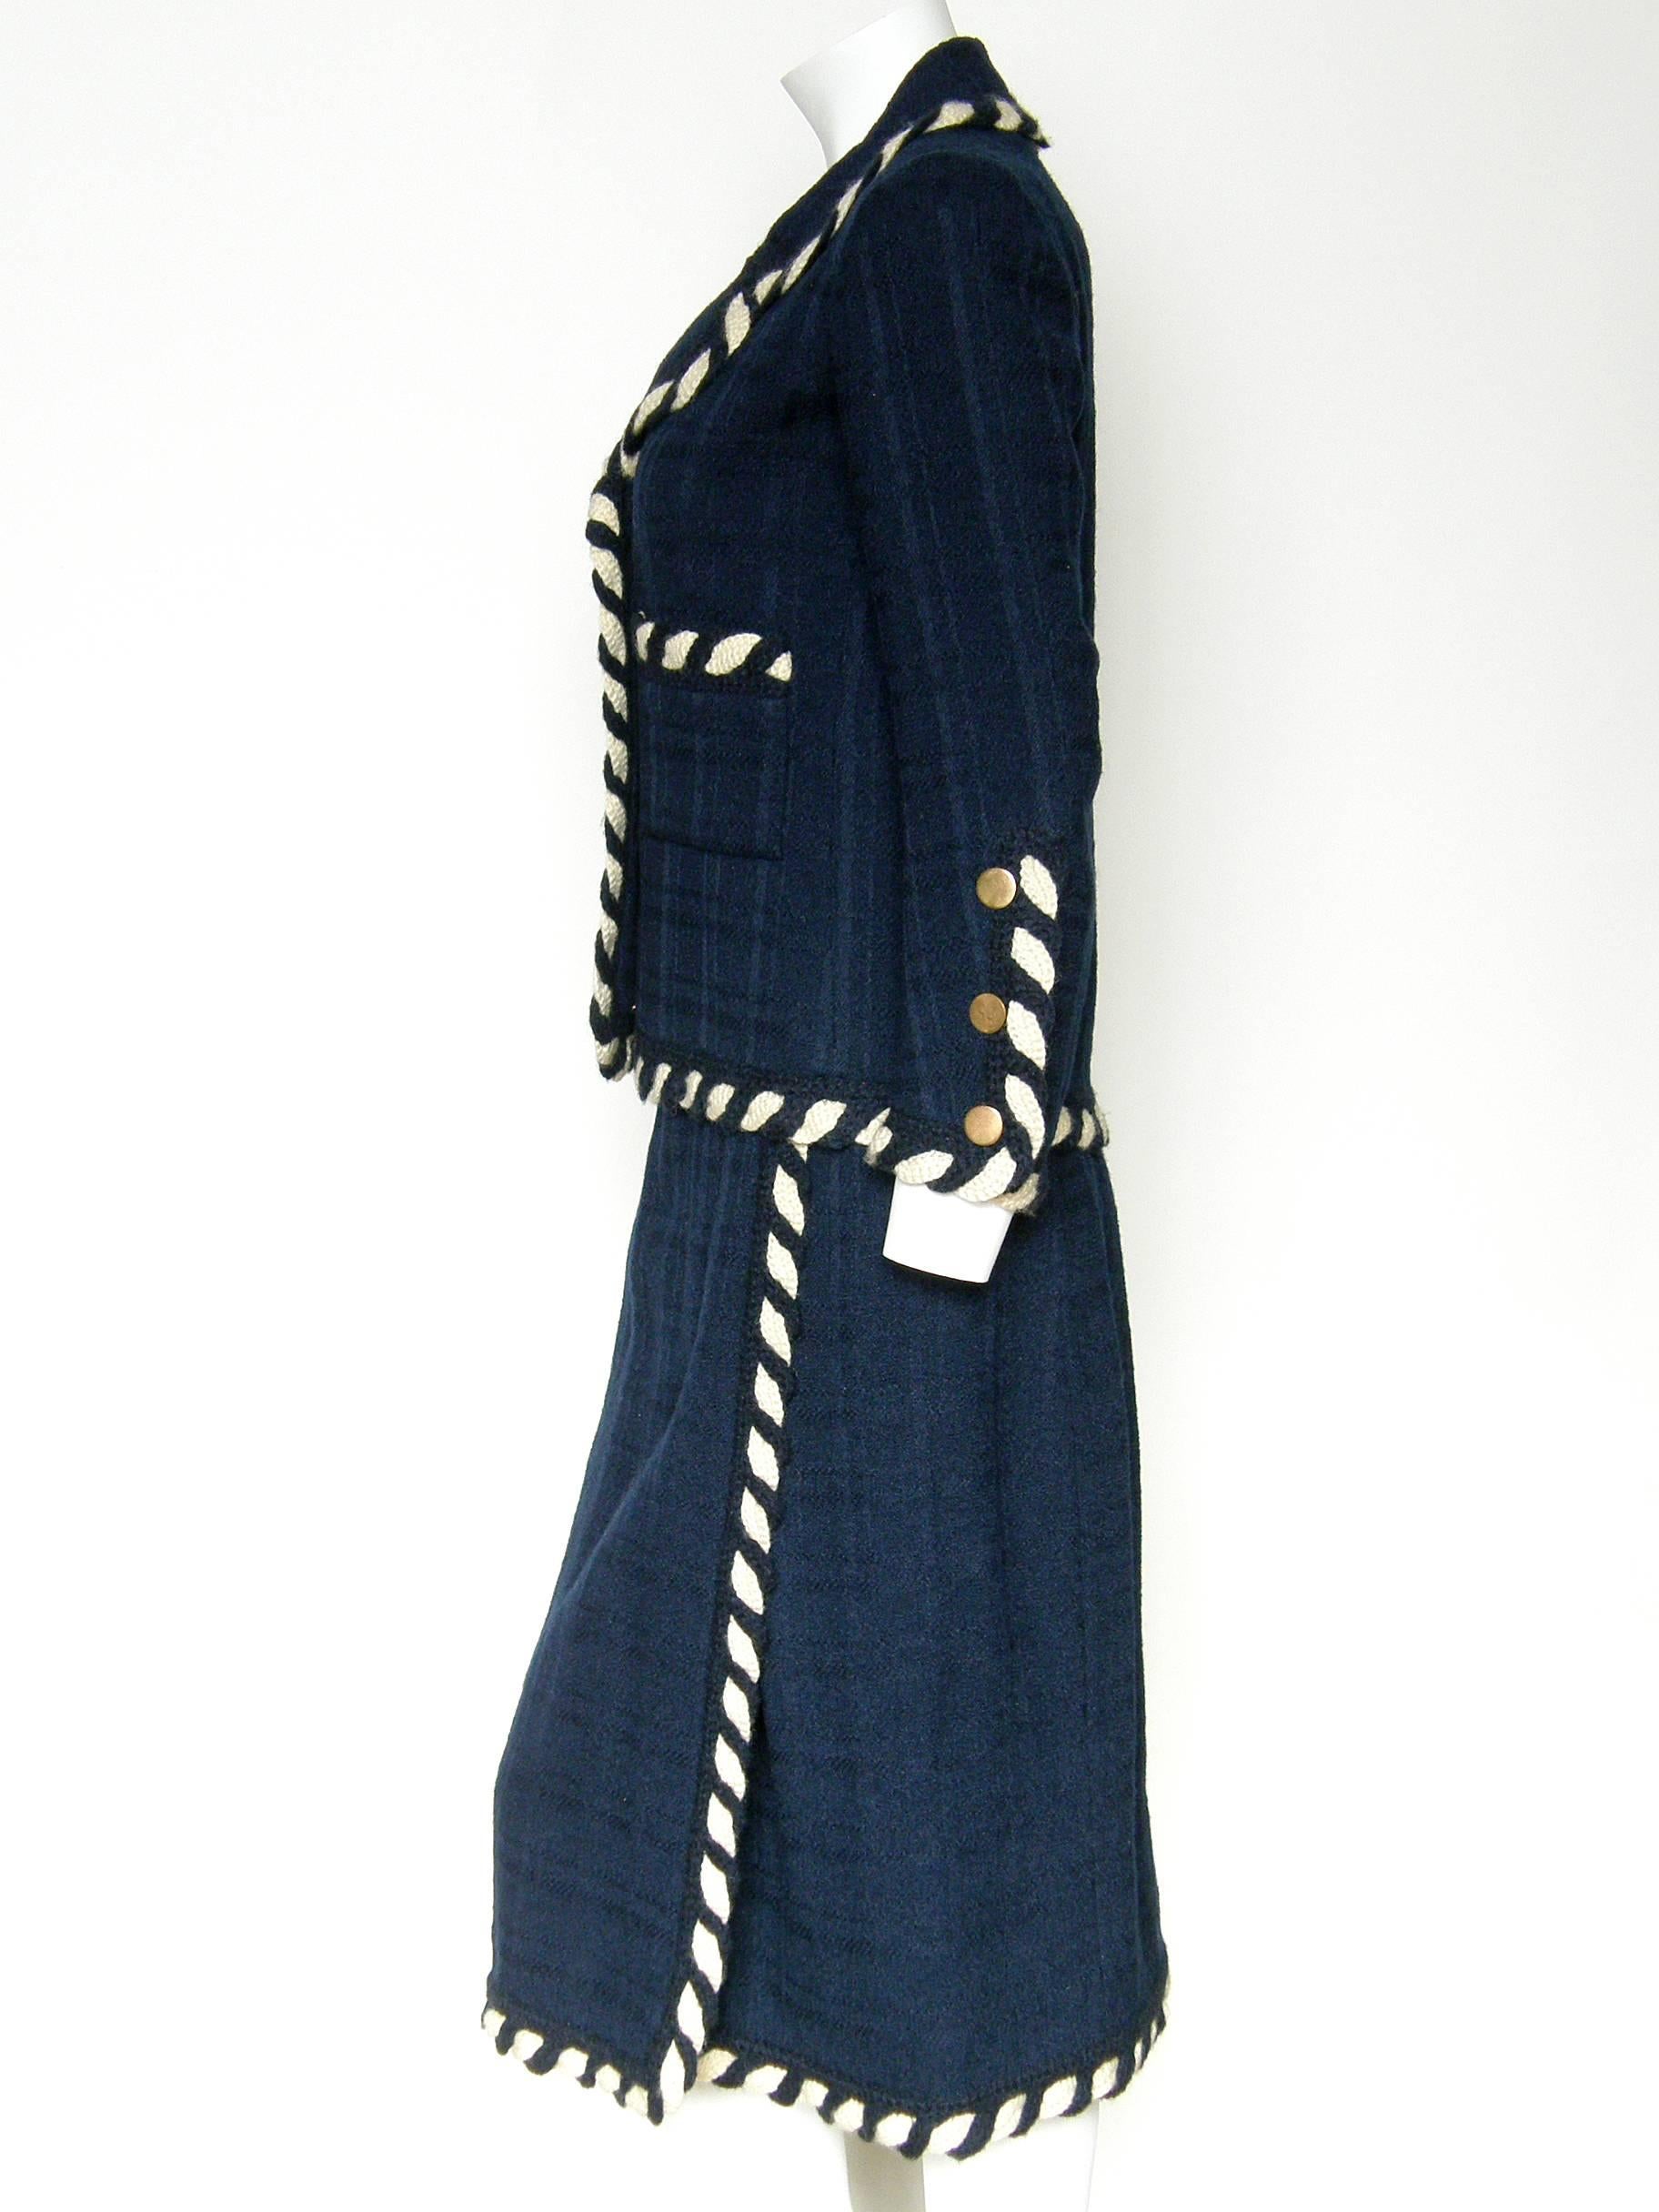 Classic, c. 1960s haute-couture suit by Chanel. The wool fabric has a subtle all navy blue, textured weave like a monochrome plaid. The jacket and skirt are accented with handmade cream and navy braided trim. They are meticulously constructed with